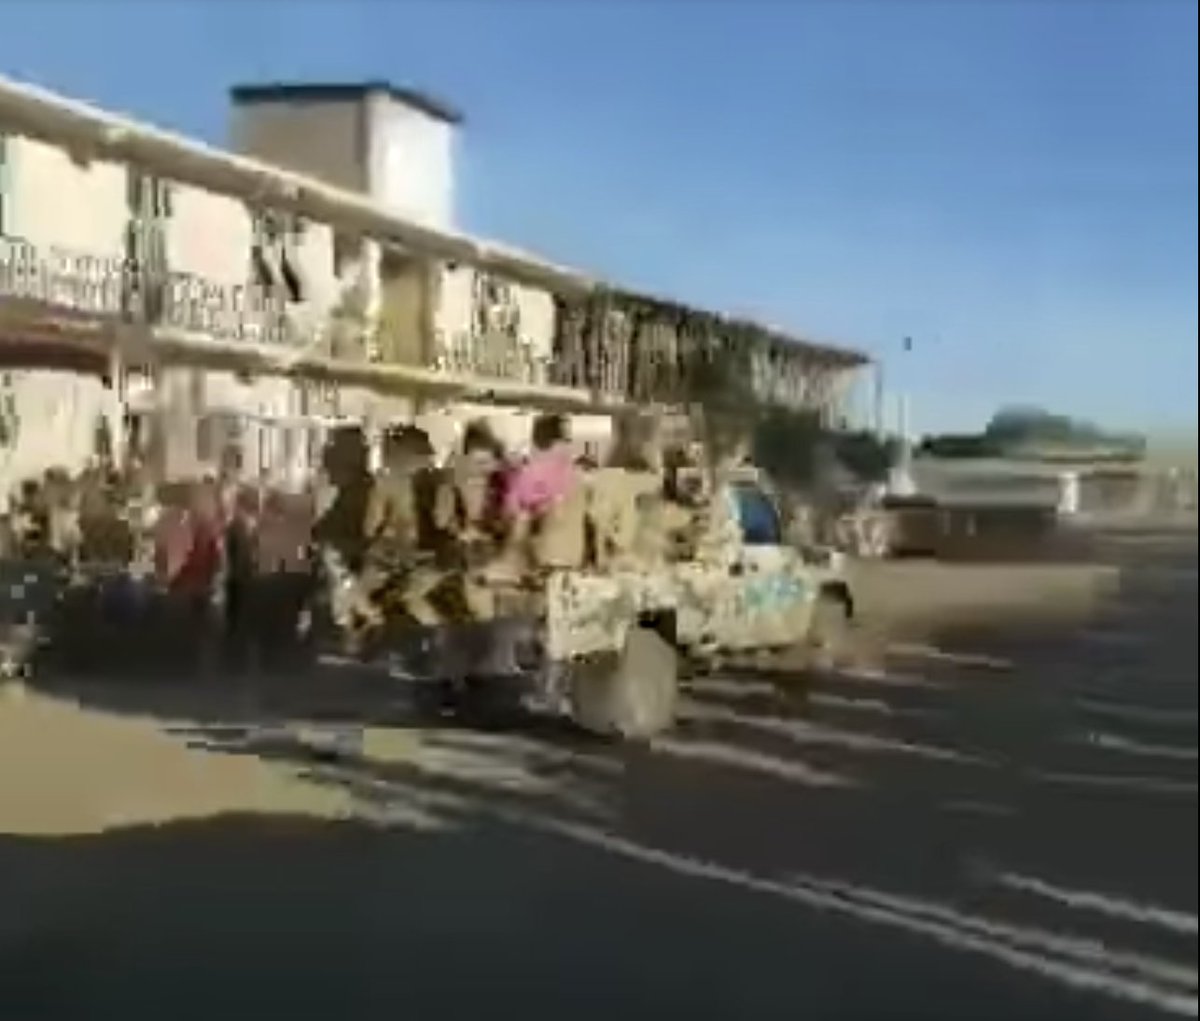 November 14, 2020 footage confirms that Amhara region's Special Force (regional paramilitary) took control of Adi Ramets last week, indicating a major (and seemingly uncontested) push into Tigray's western highlands  https://facebook.com/100034675000364/videos/420524402446723